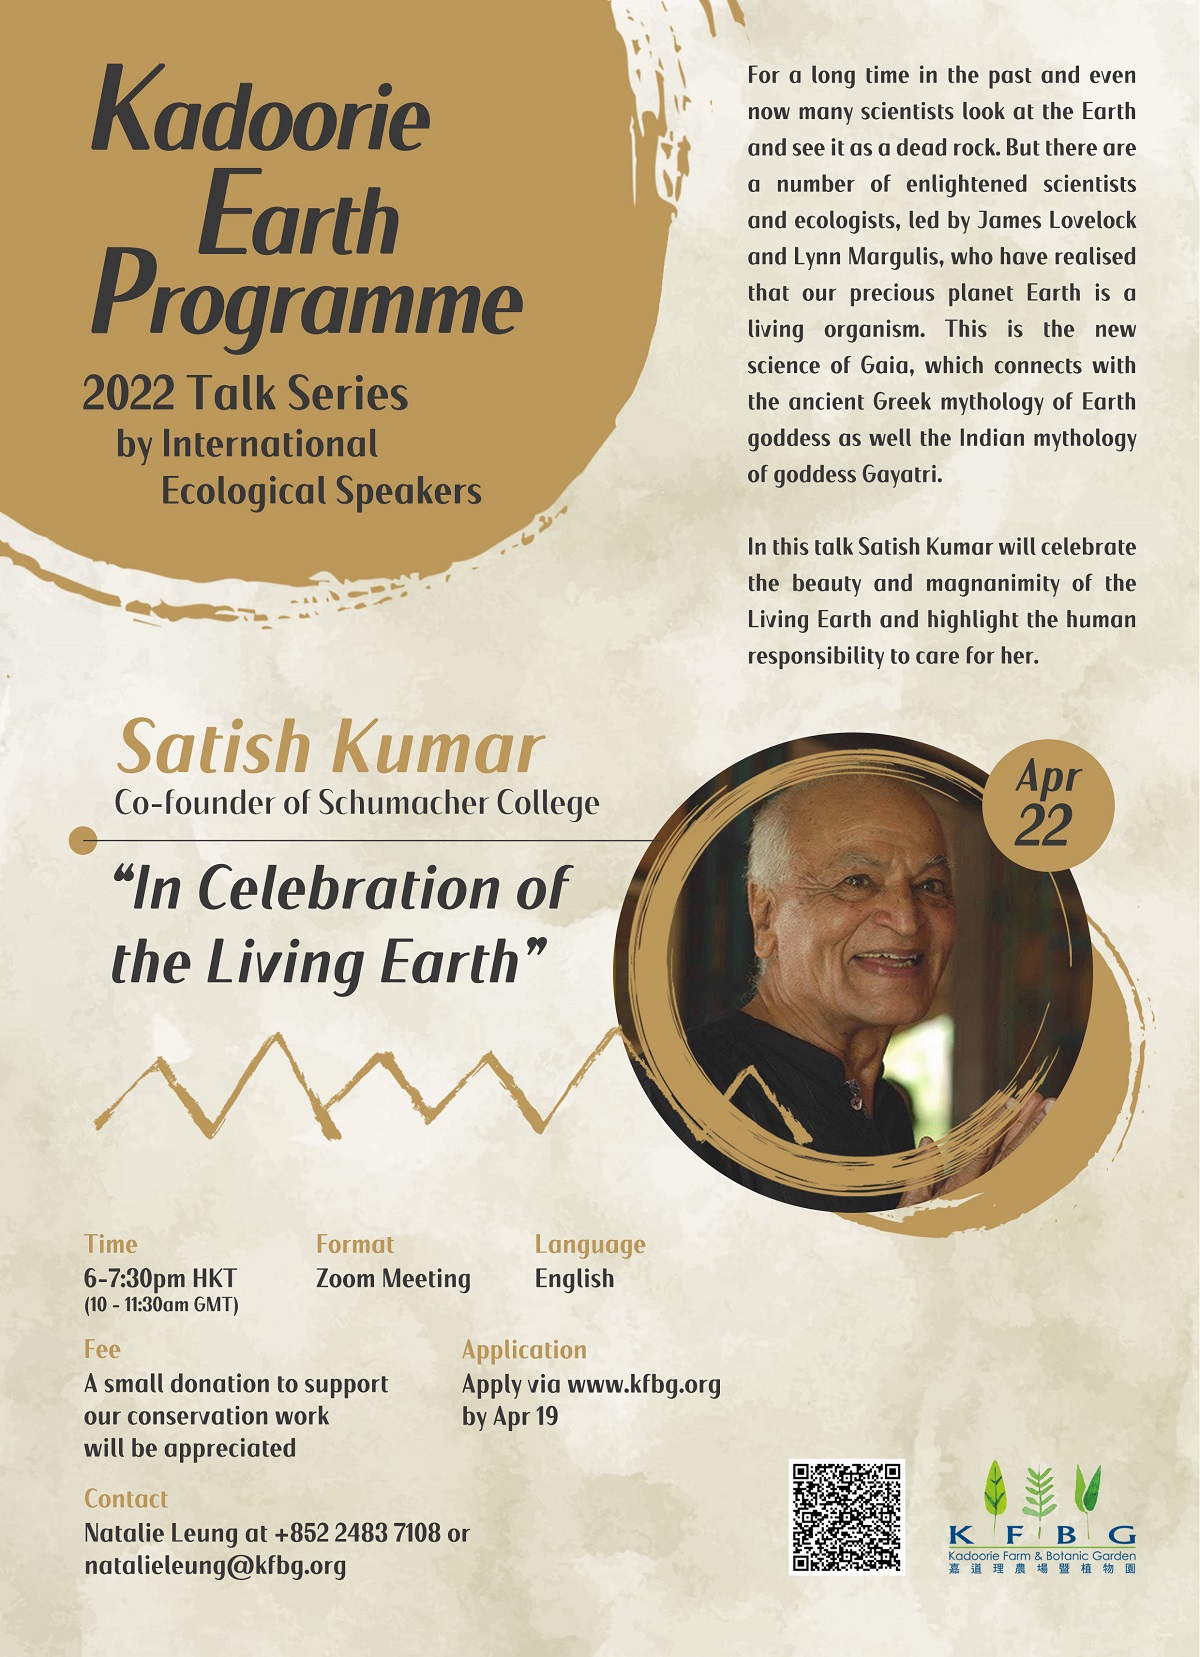 Kadoorie Earth Programme 2022 Talk series by International Ecological Speakers “In Celebration of the Living Earth” with Satish Kumar